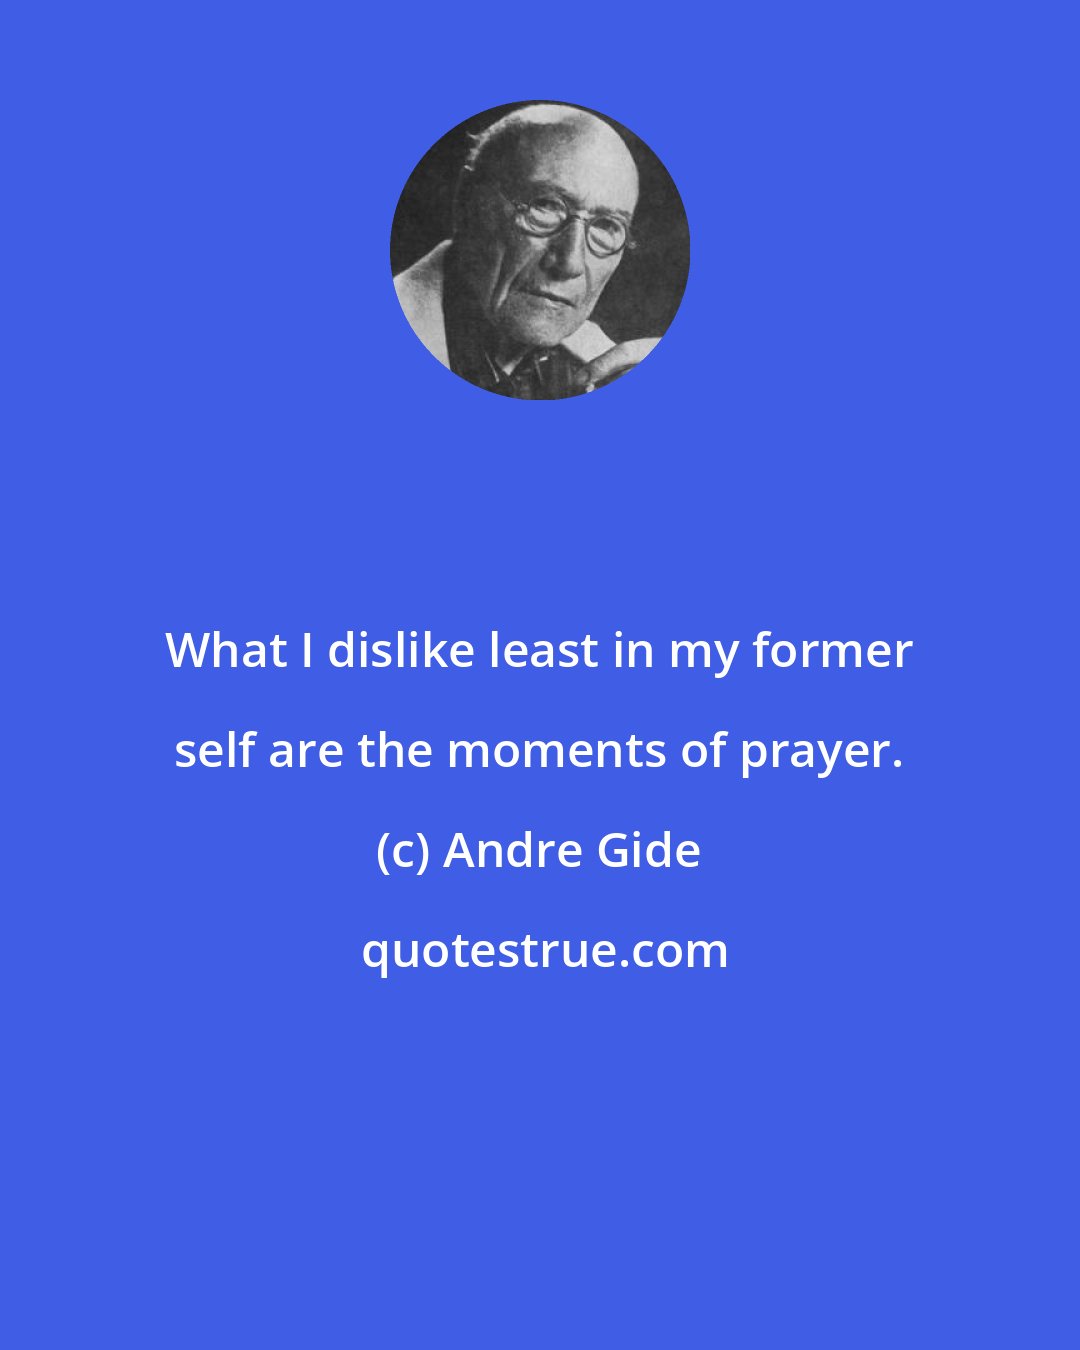 Andre Gide: What I dislike least in my former self are the moments of prayer.